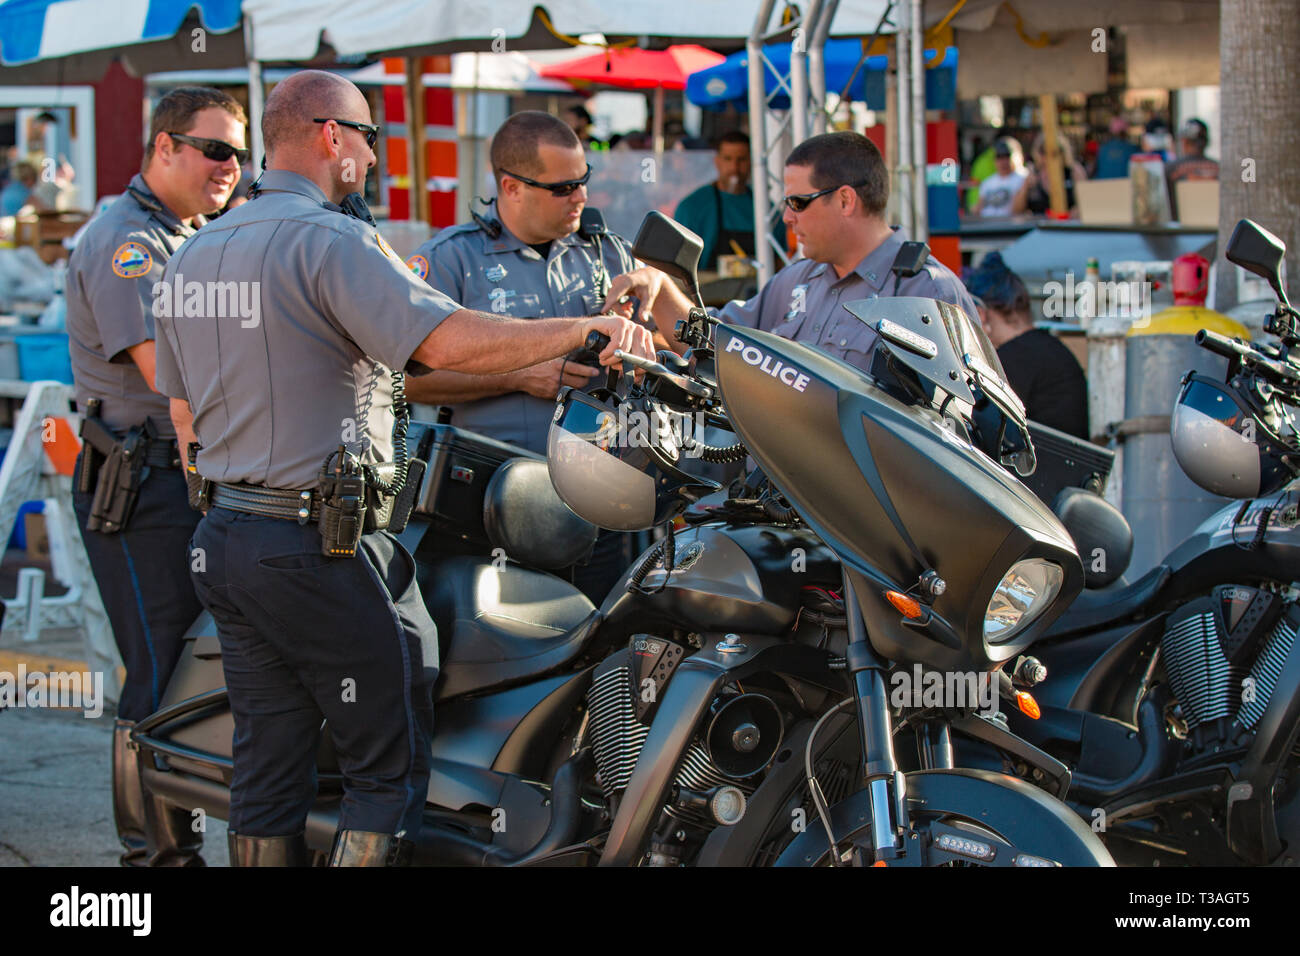 Daytona Beach, FL - 12 March 2016: Daytona Beach motorcycle police officers at the 75th Annual Bike Week at the World's Most Famous Beach. Stock Photo